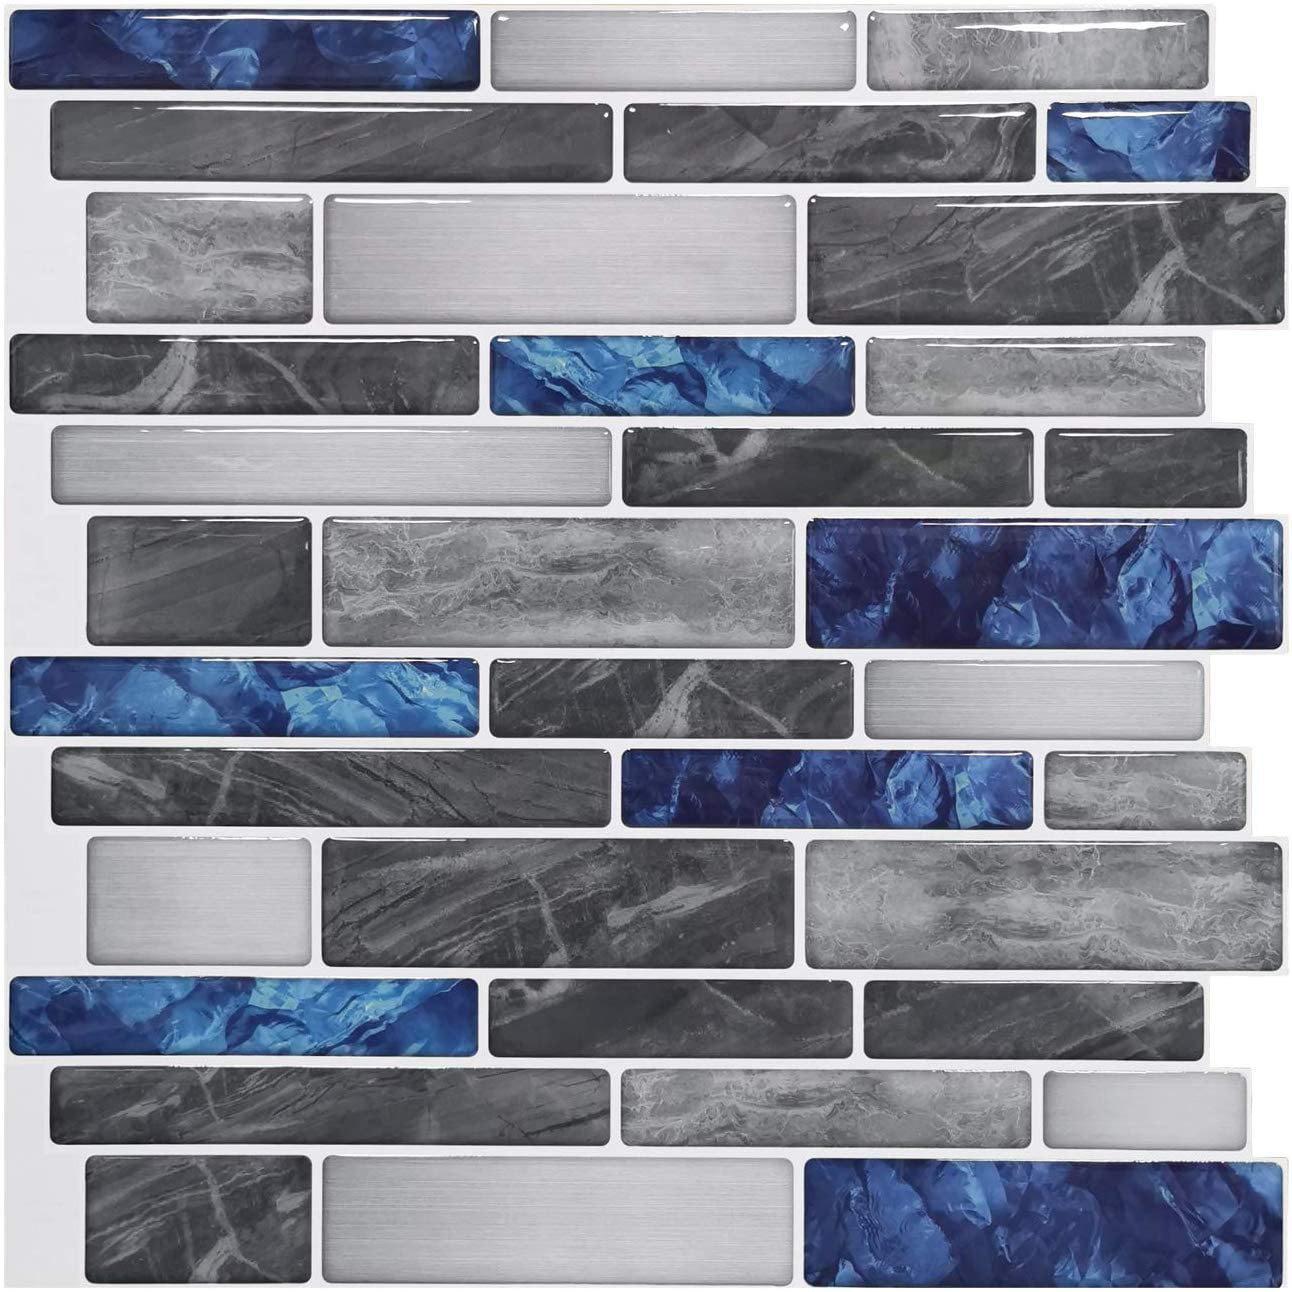 Art3d 12x12 Self Adhesive Wall Tile Peel and Stick Backsplash for Kitchen 6 Pack Long Marble Design